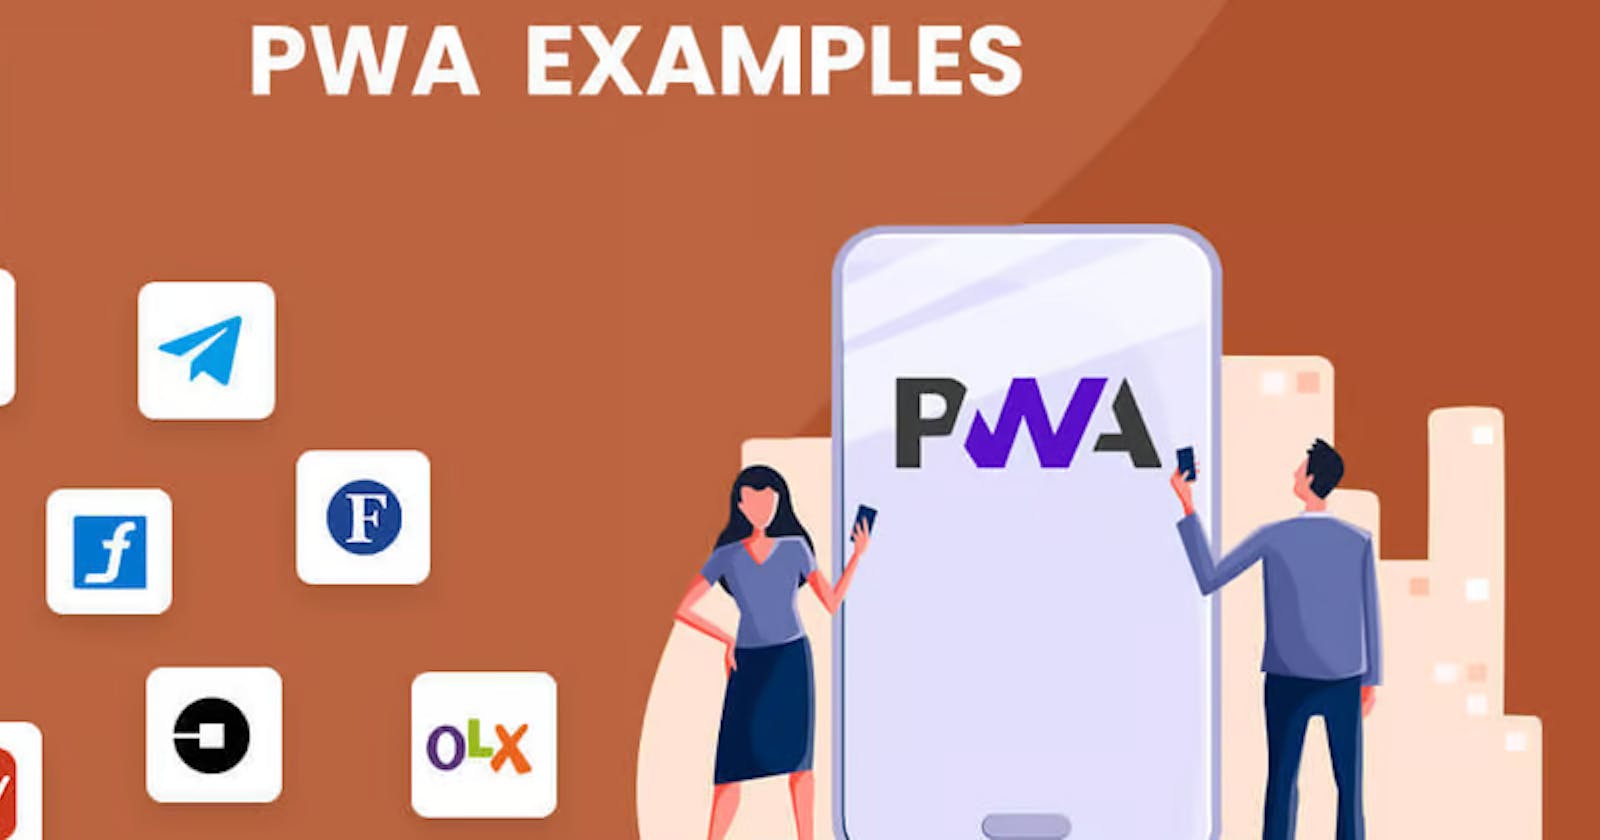 Getting started with PWAs